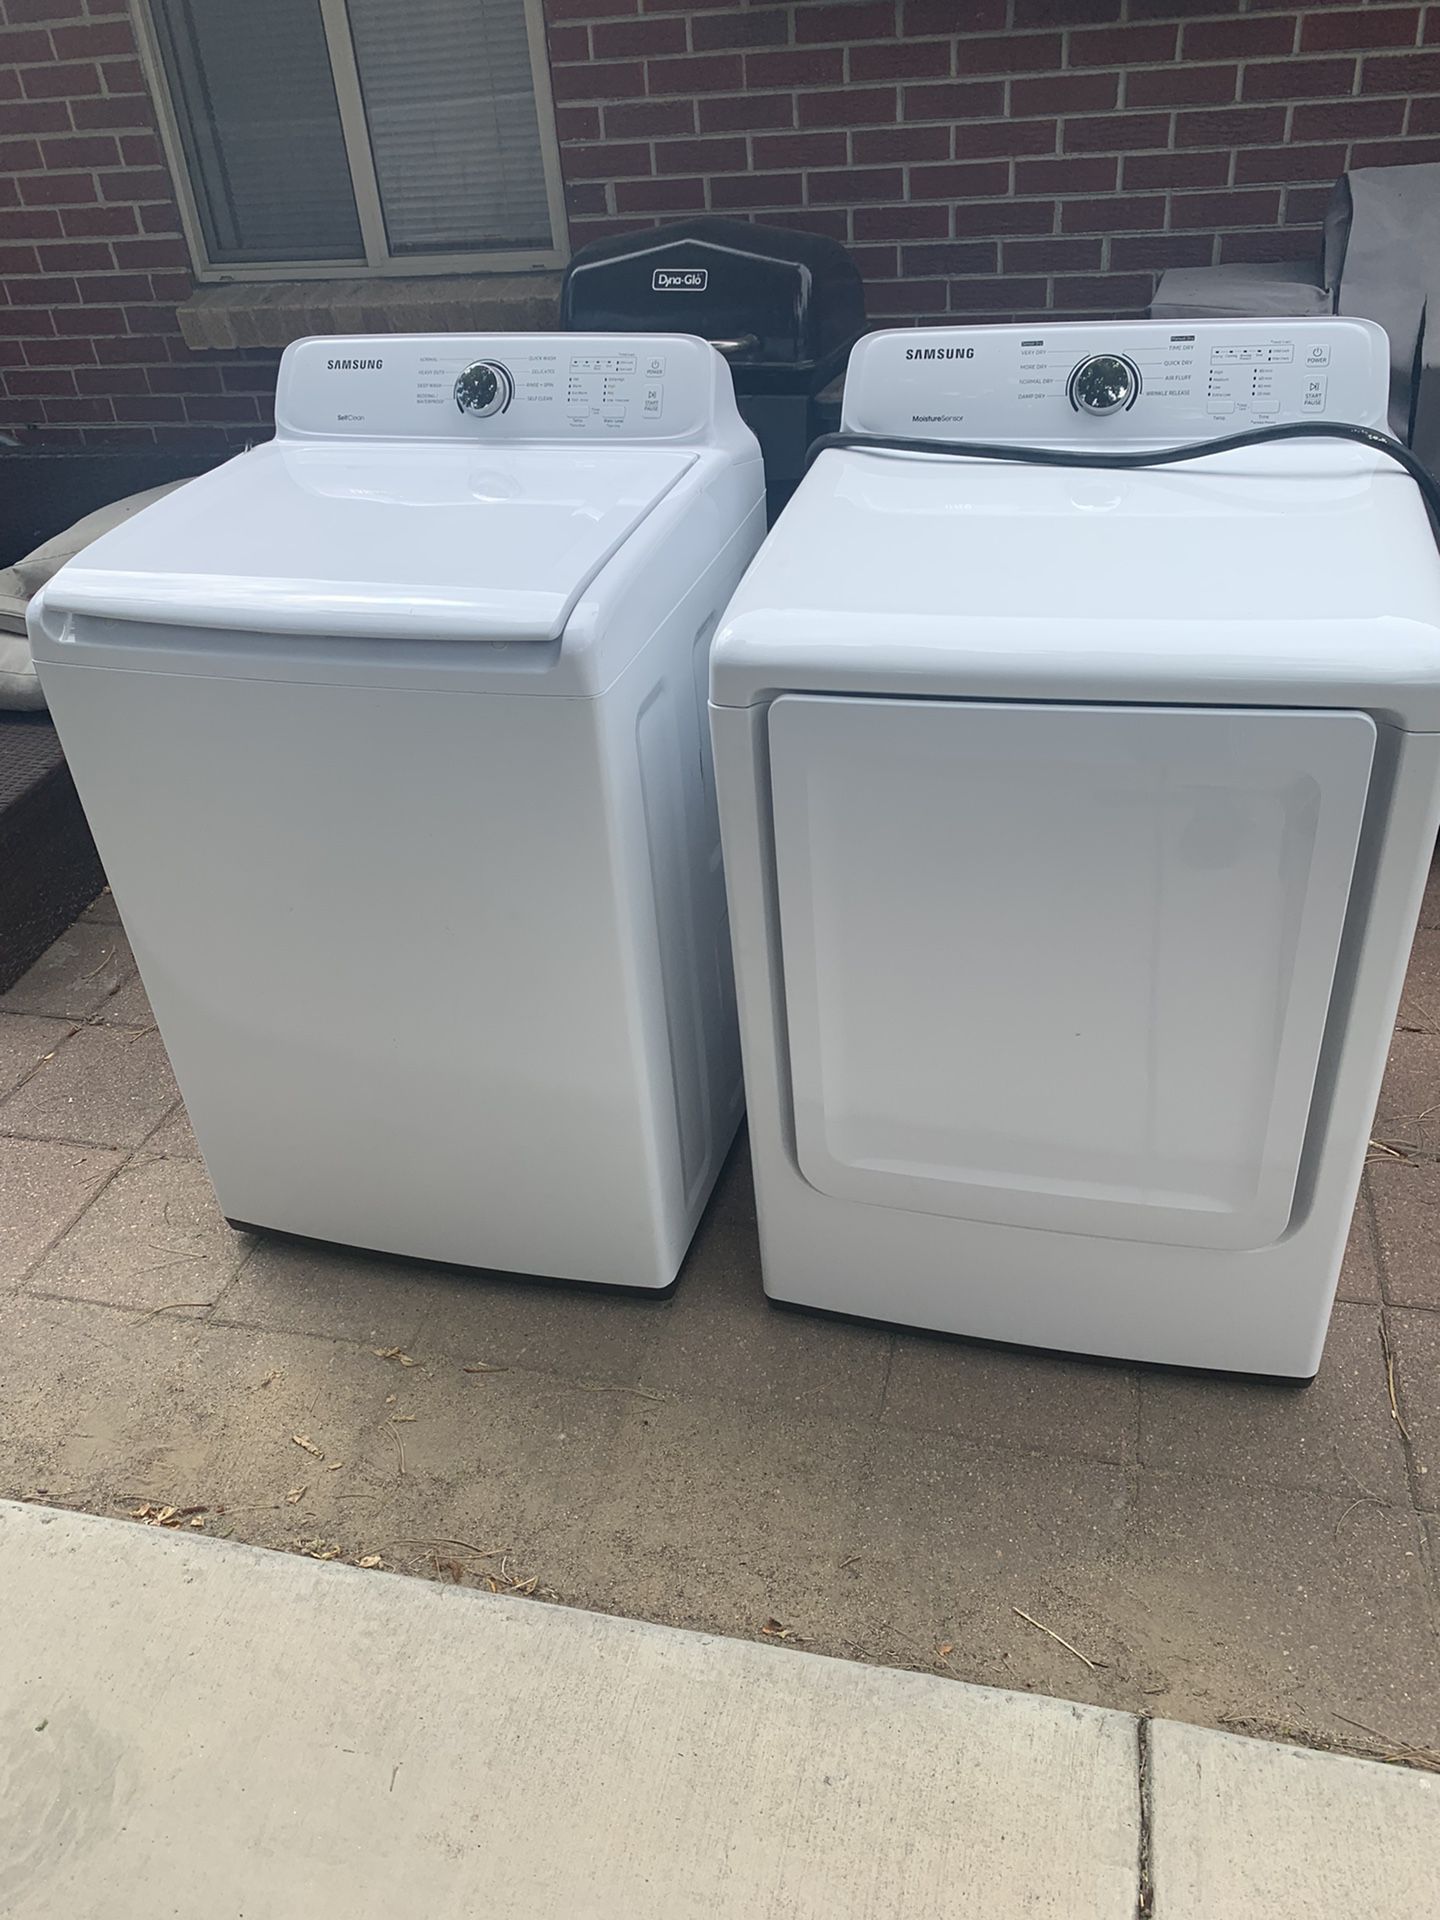 Samsung Washer And Dryer $500